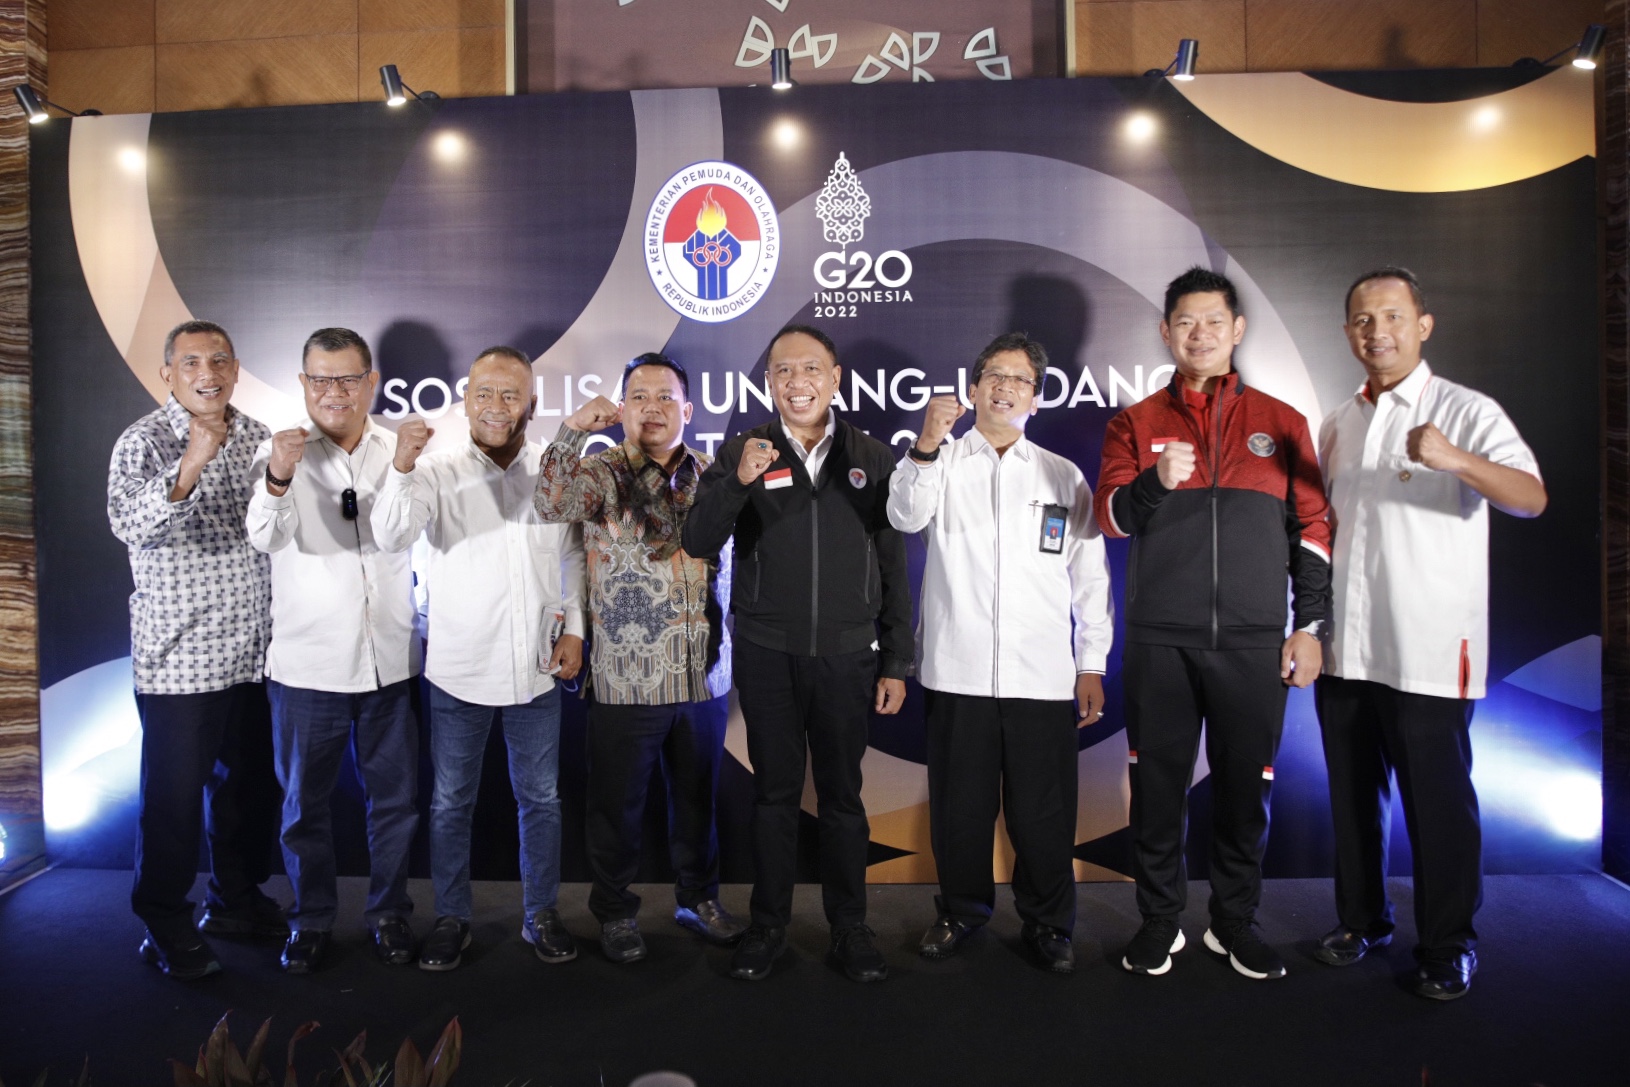 Ministry of Youth and Sports kicks off Sports Law socialization - Indonesia Olympic Commitee